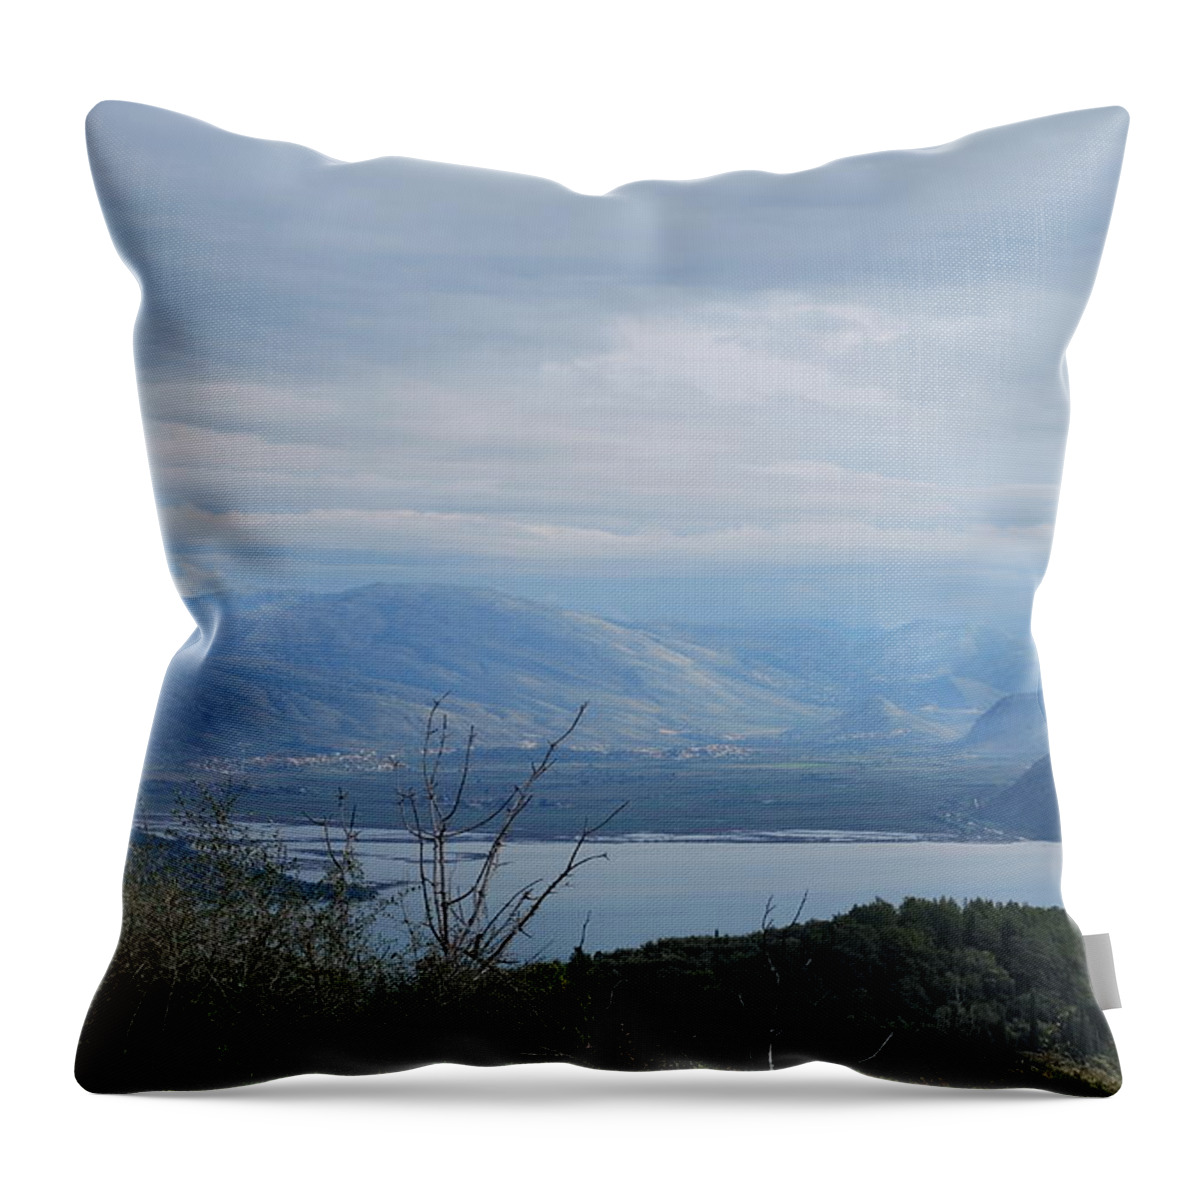 Seascape Throw Pillow featuring the photograph Vivary by George Katechis